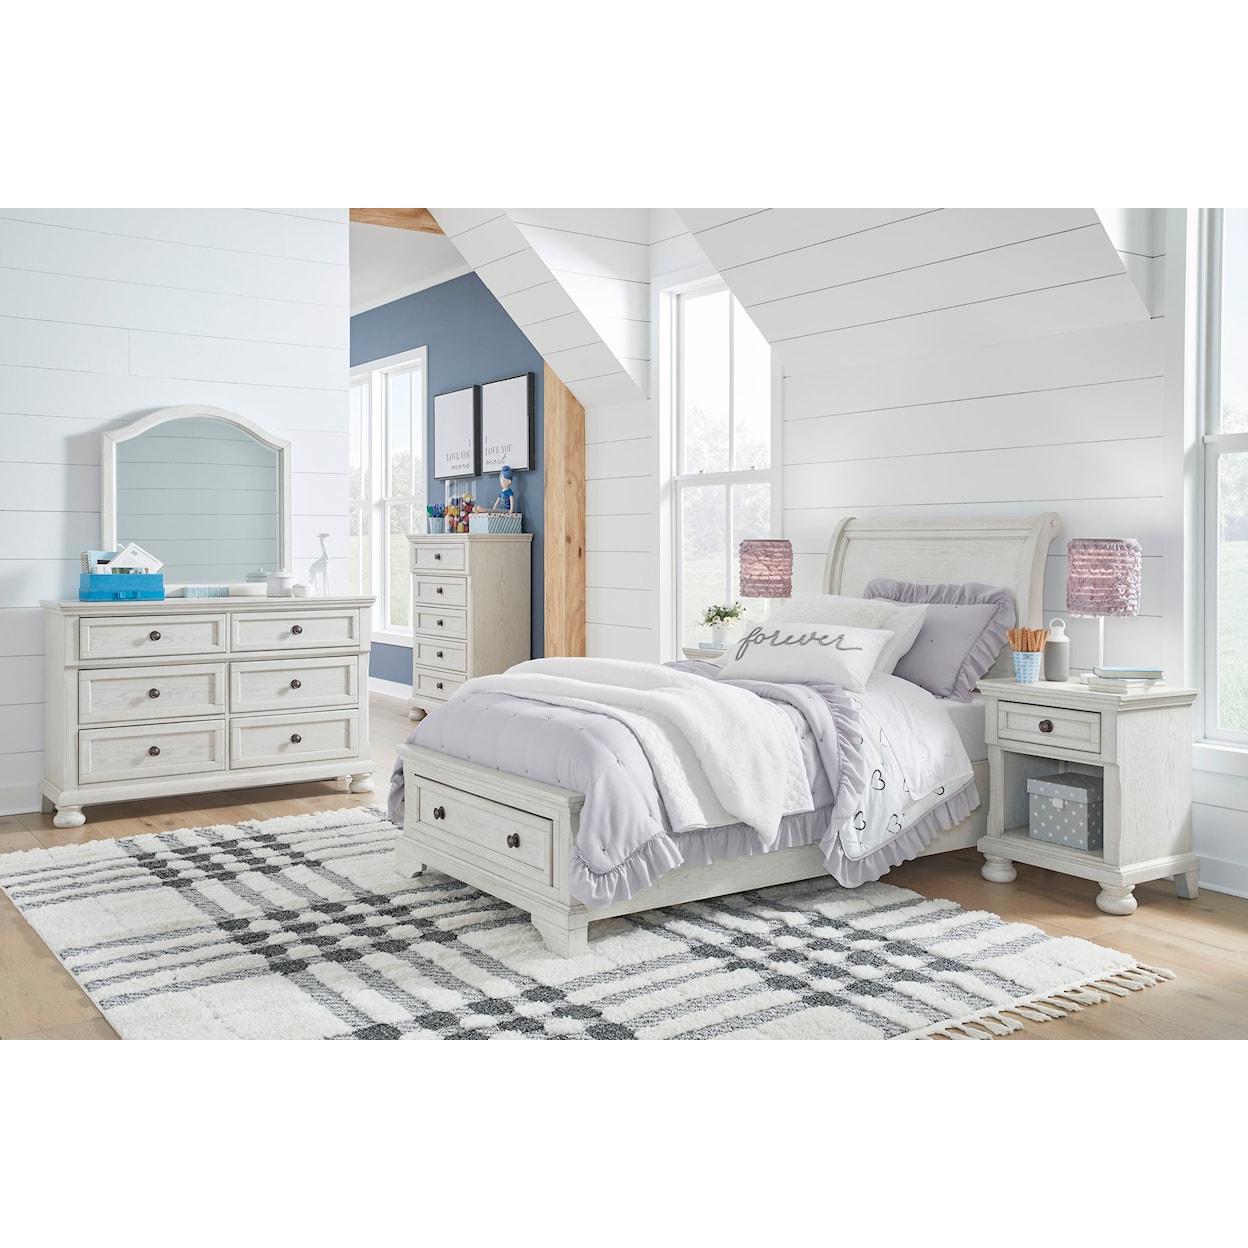 Signature Design by Ashley Furniture Robbinsdale Twin Sleigh Bed with Storage